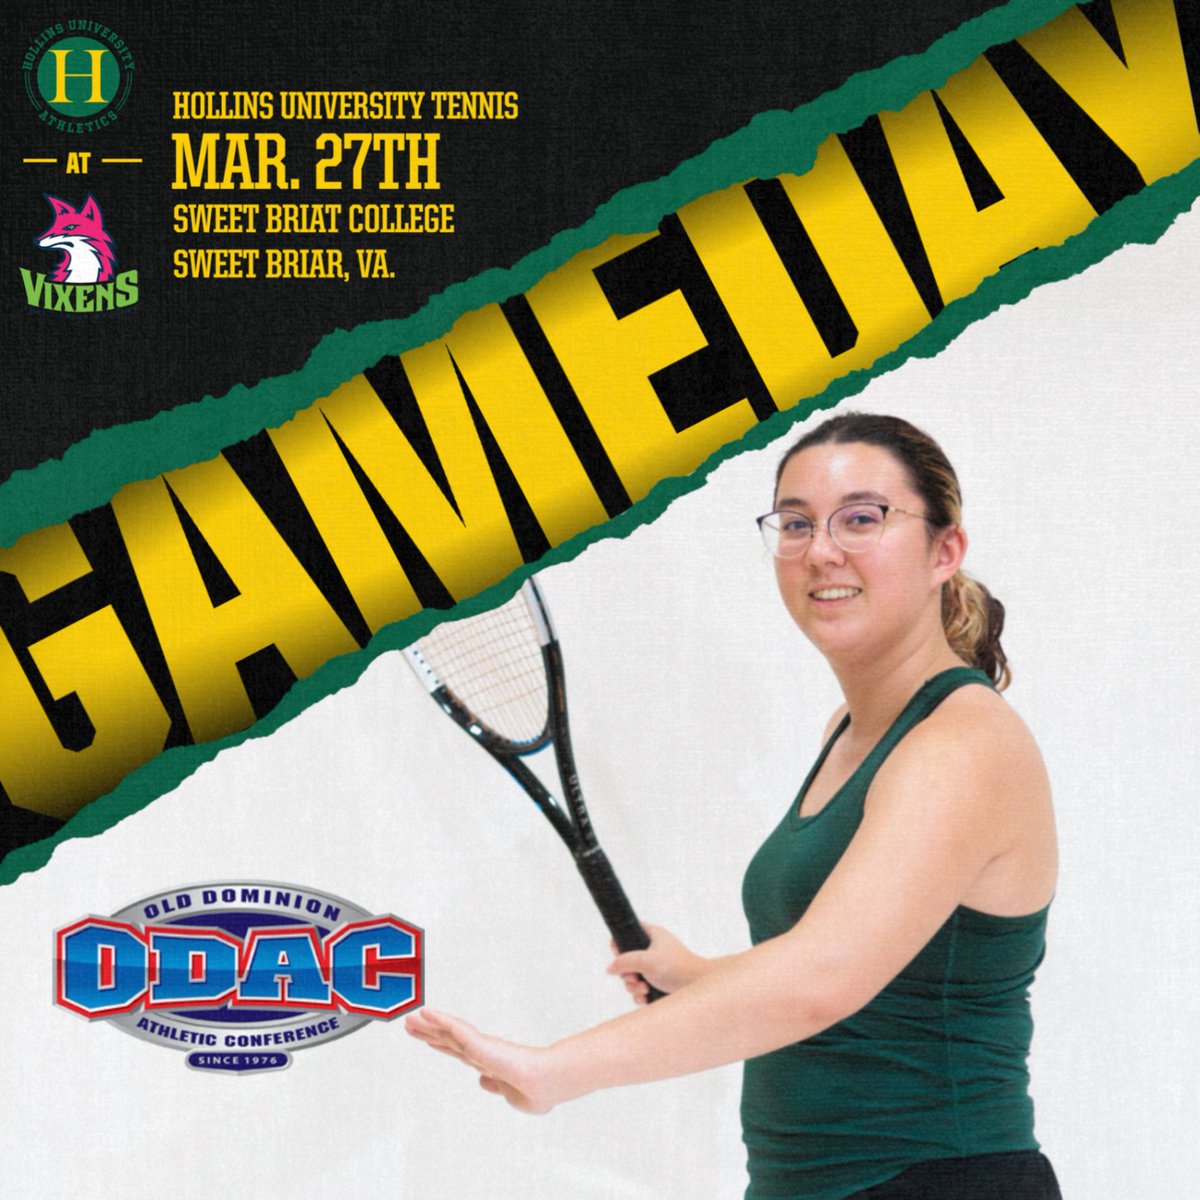 GAMEDAY for Hollins tennis with a road trip to Sweet Briar this afternoon. #MyHollins